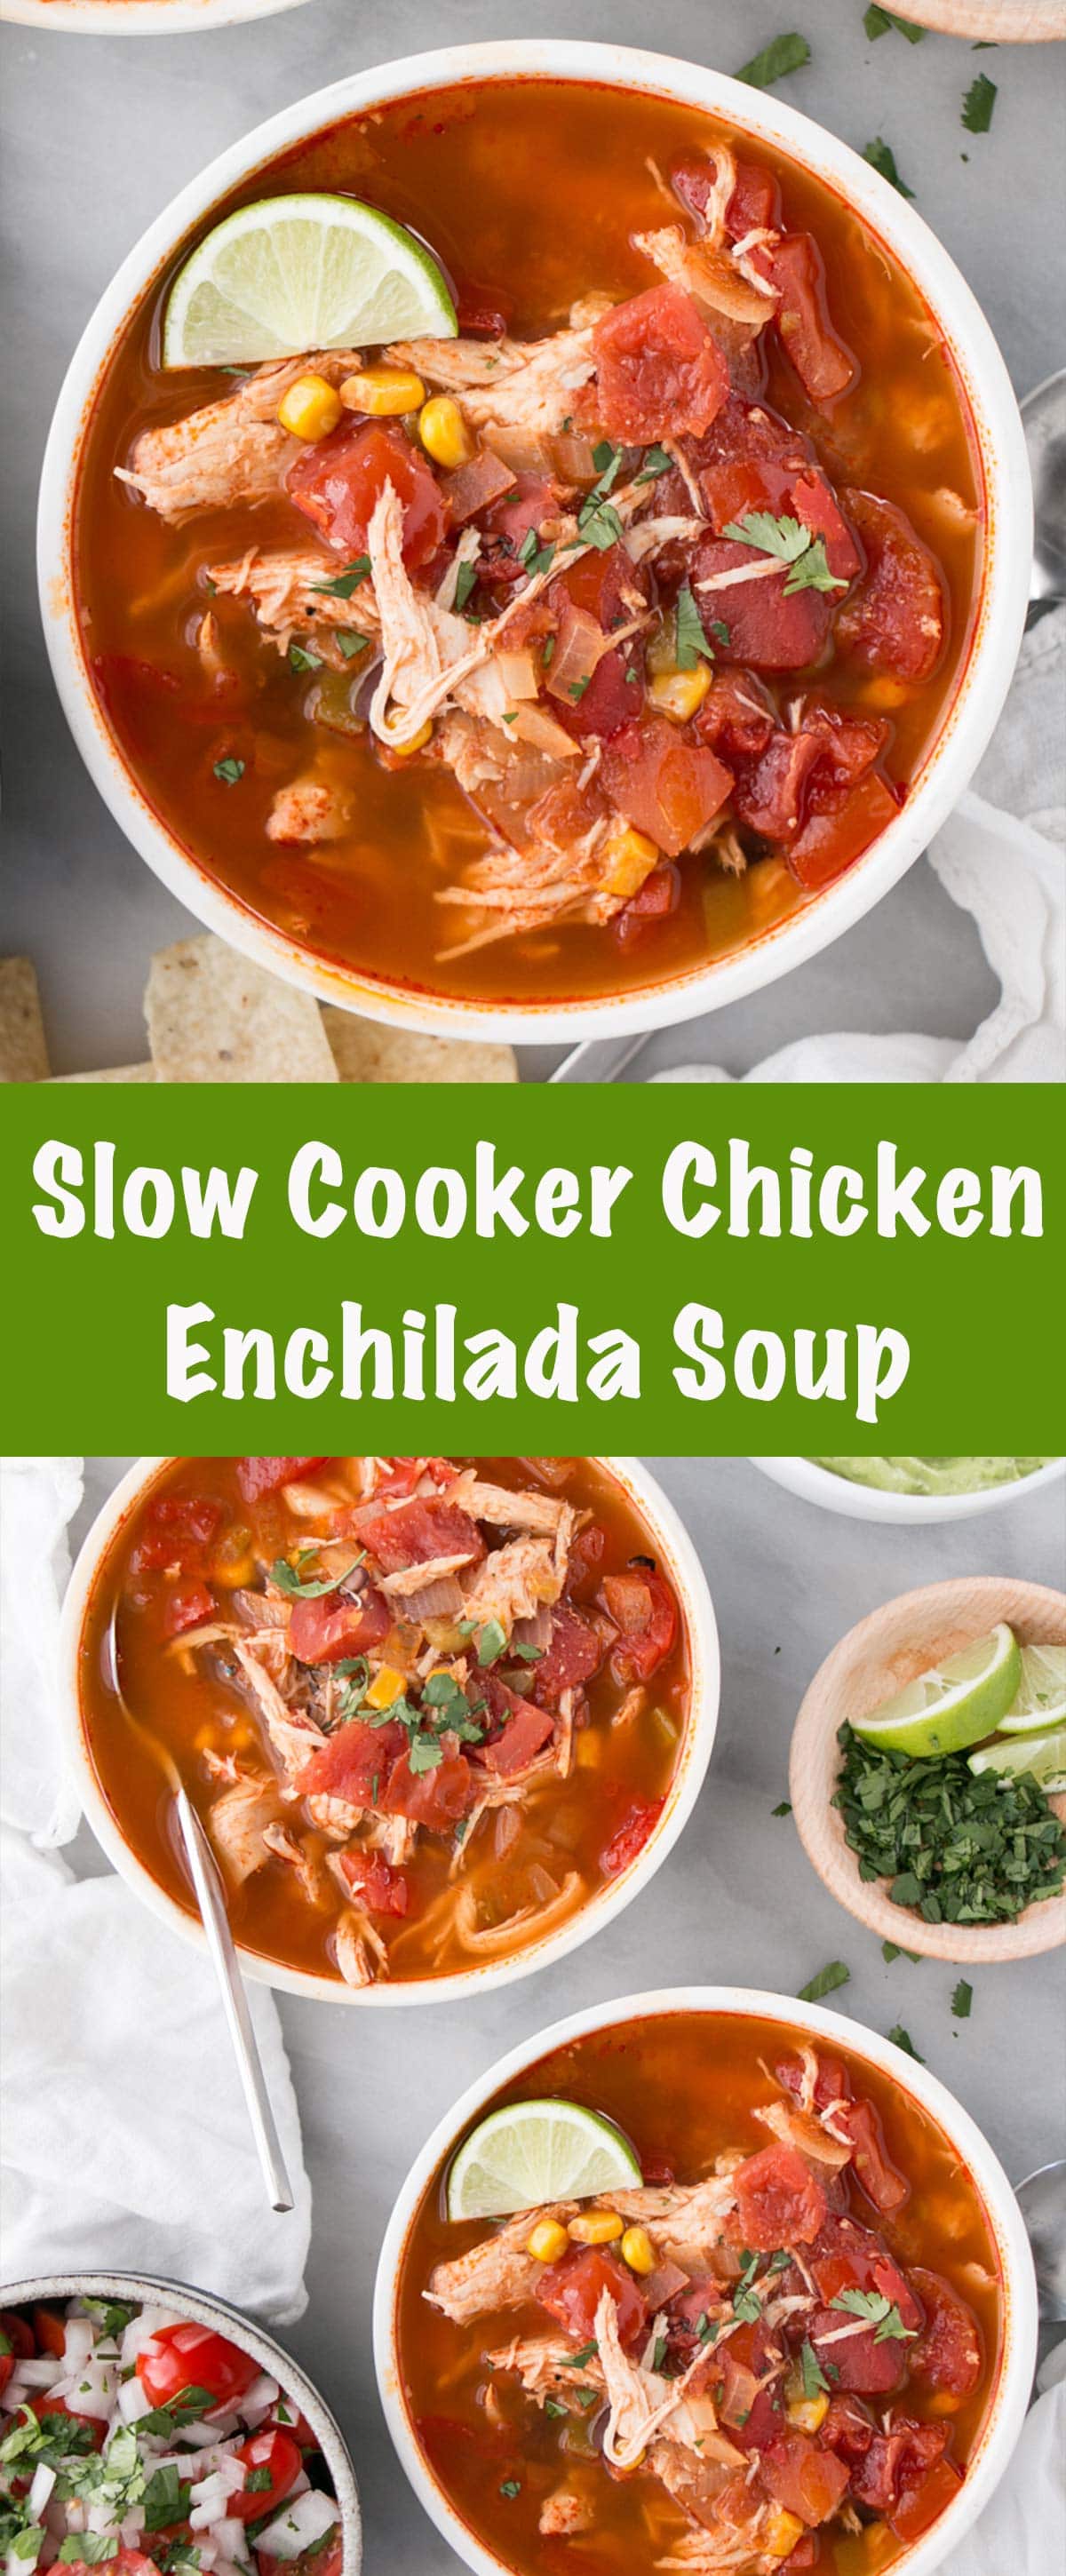 Hearty, flavourful, and nourishing Slow Cooker Chicken Enchilada Soup. A true set it and forget it dinner recipe the entire family will love. via @mykitchenlove